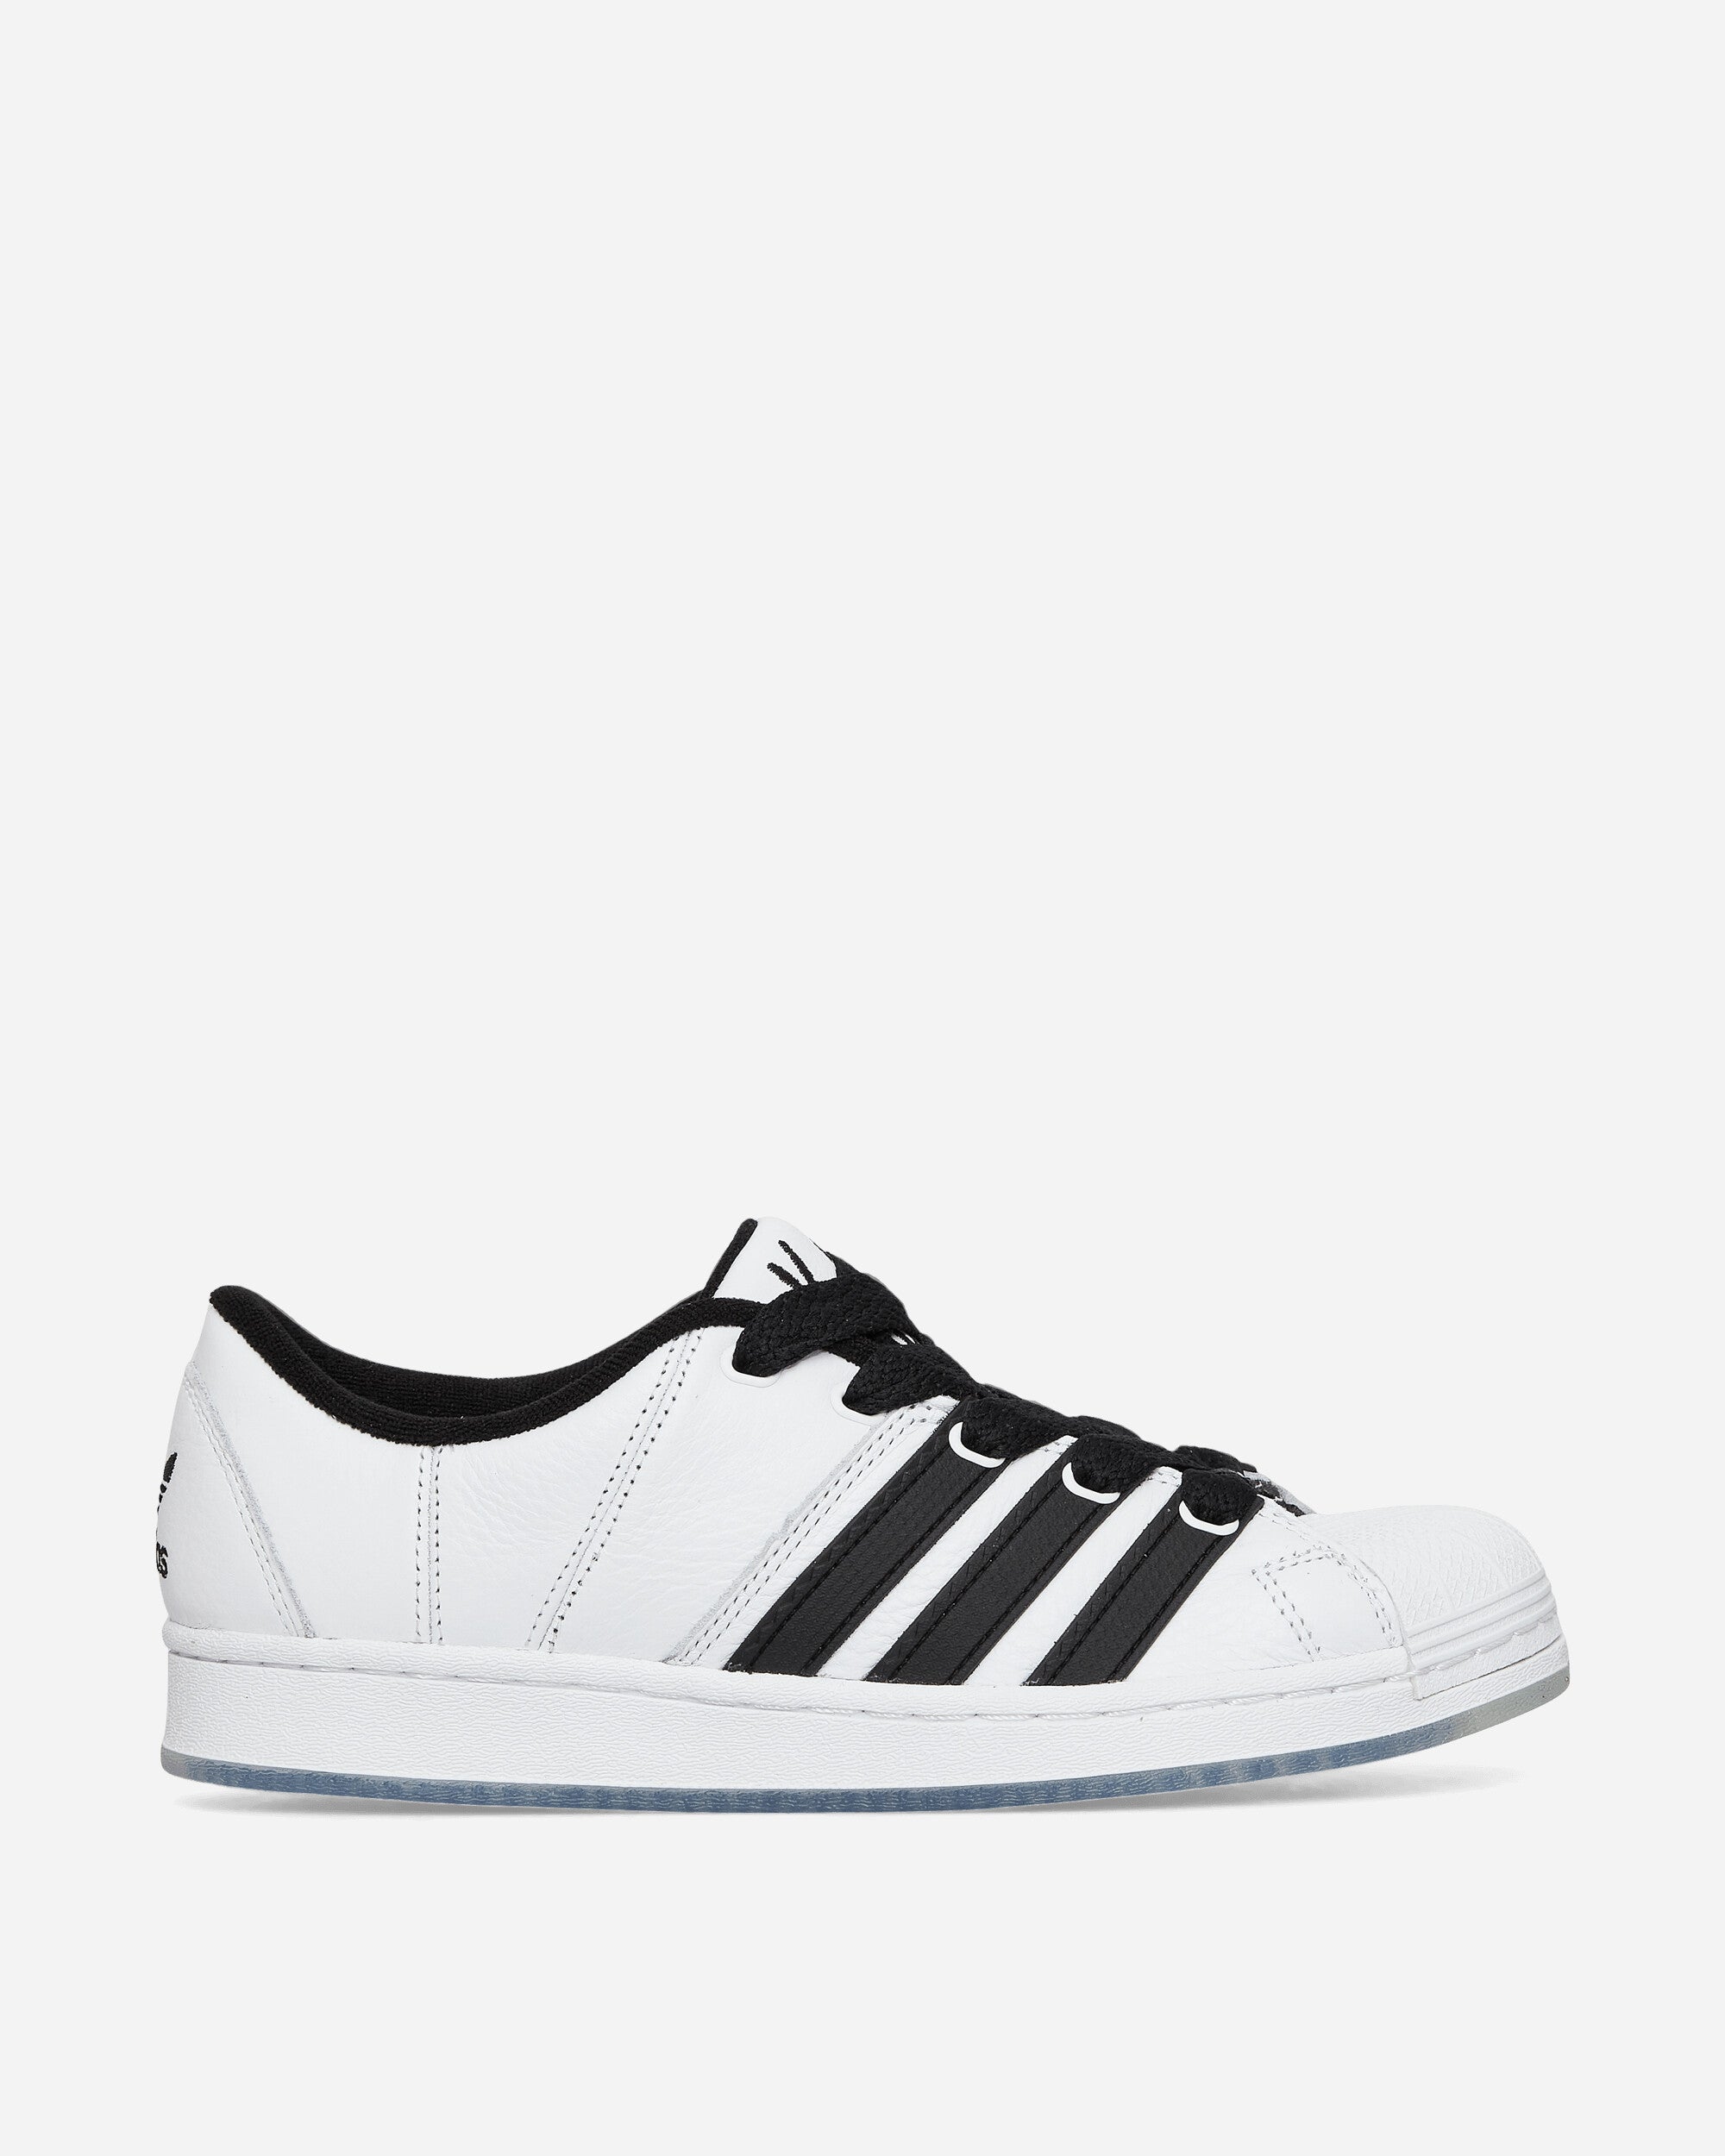 adidas Supermodified Korn Ftwr White/Core Black Sneakers Low IG0793 001